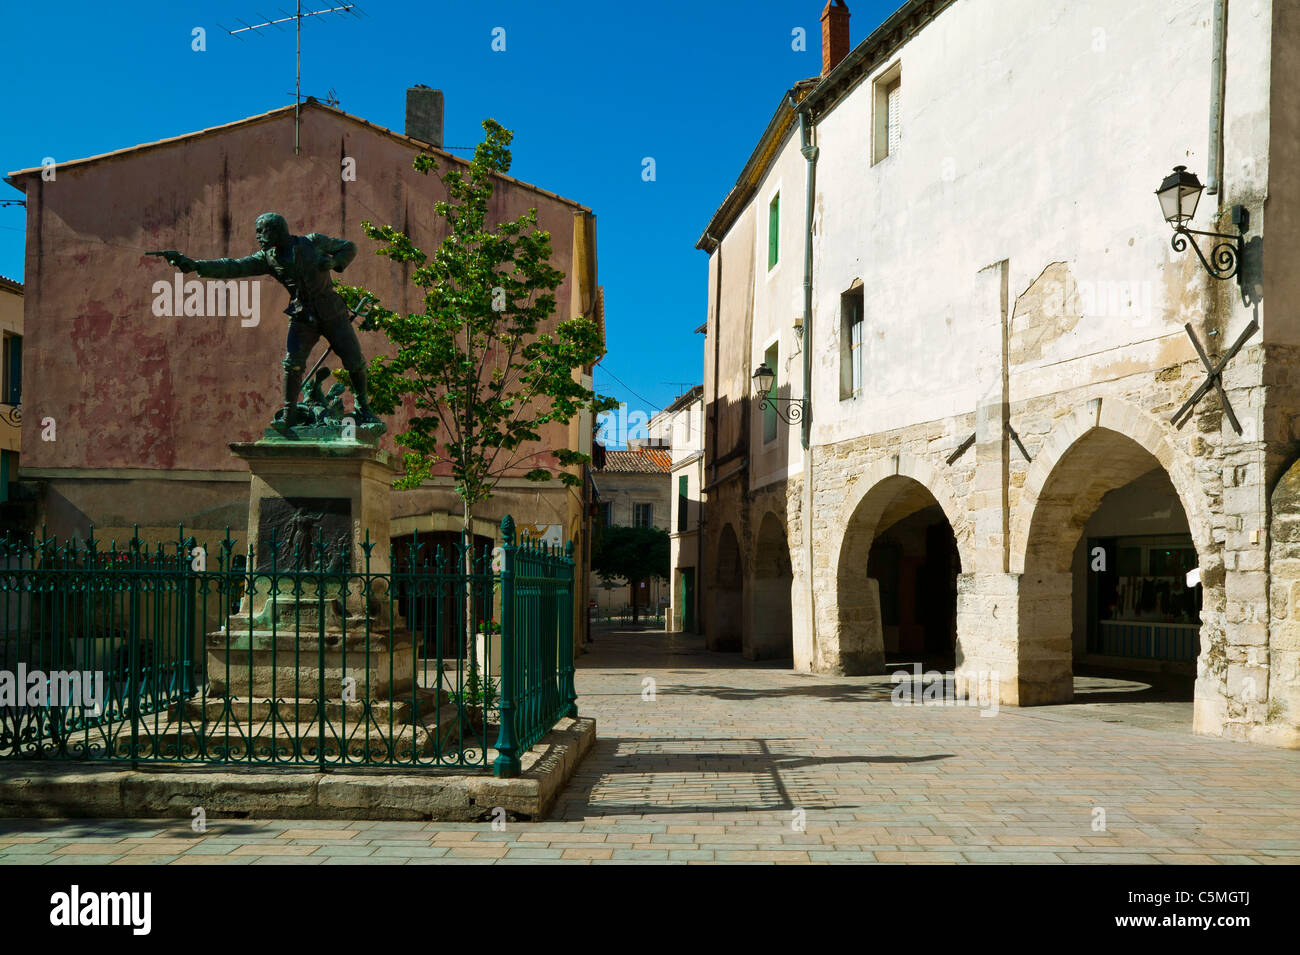 Statue Of Charles Menard,Lunel, Herault,Languedoc-Roussillon,France Stock Photo